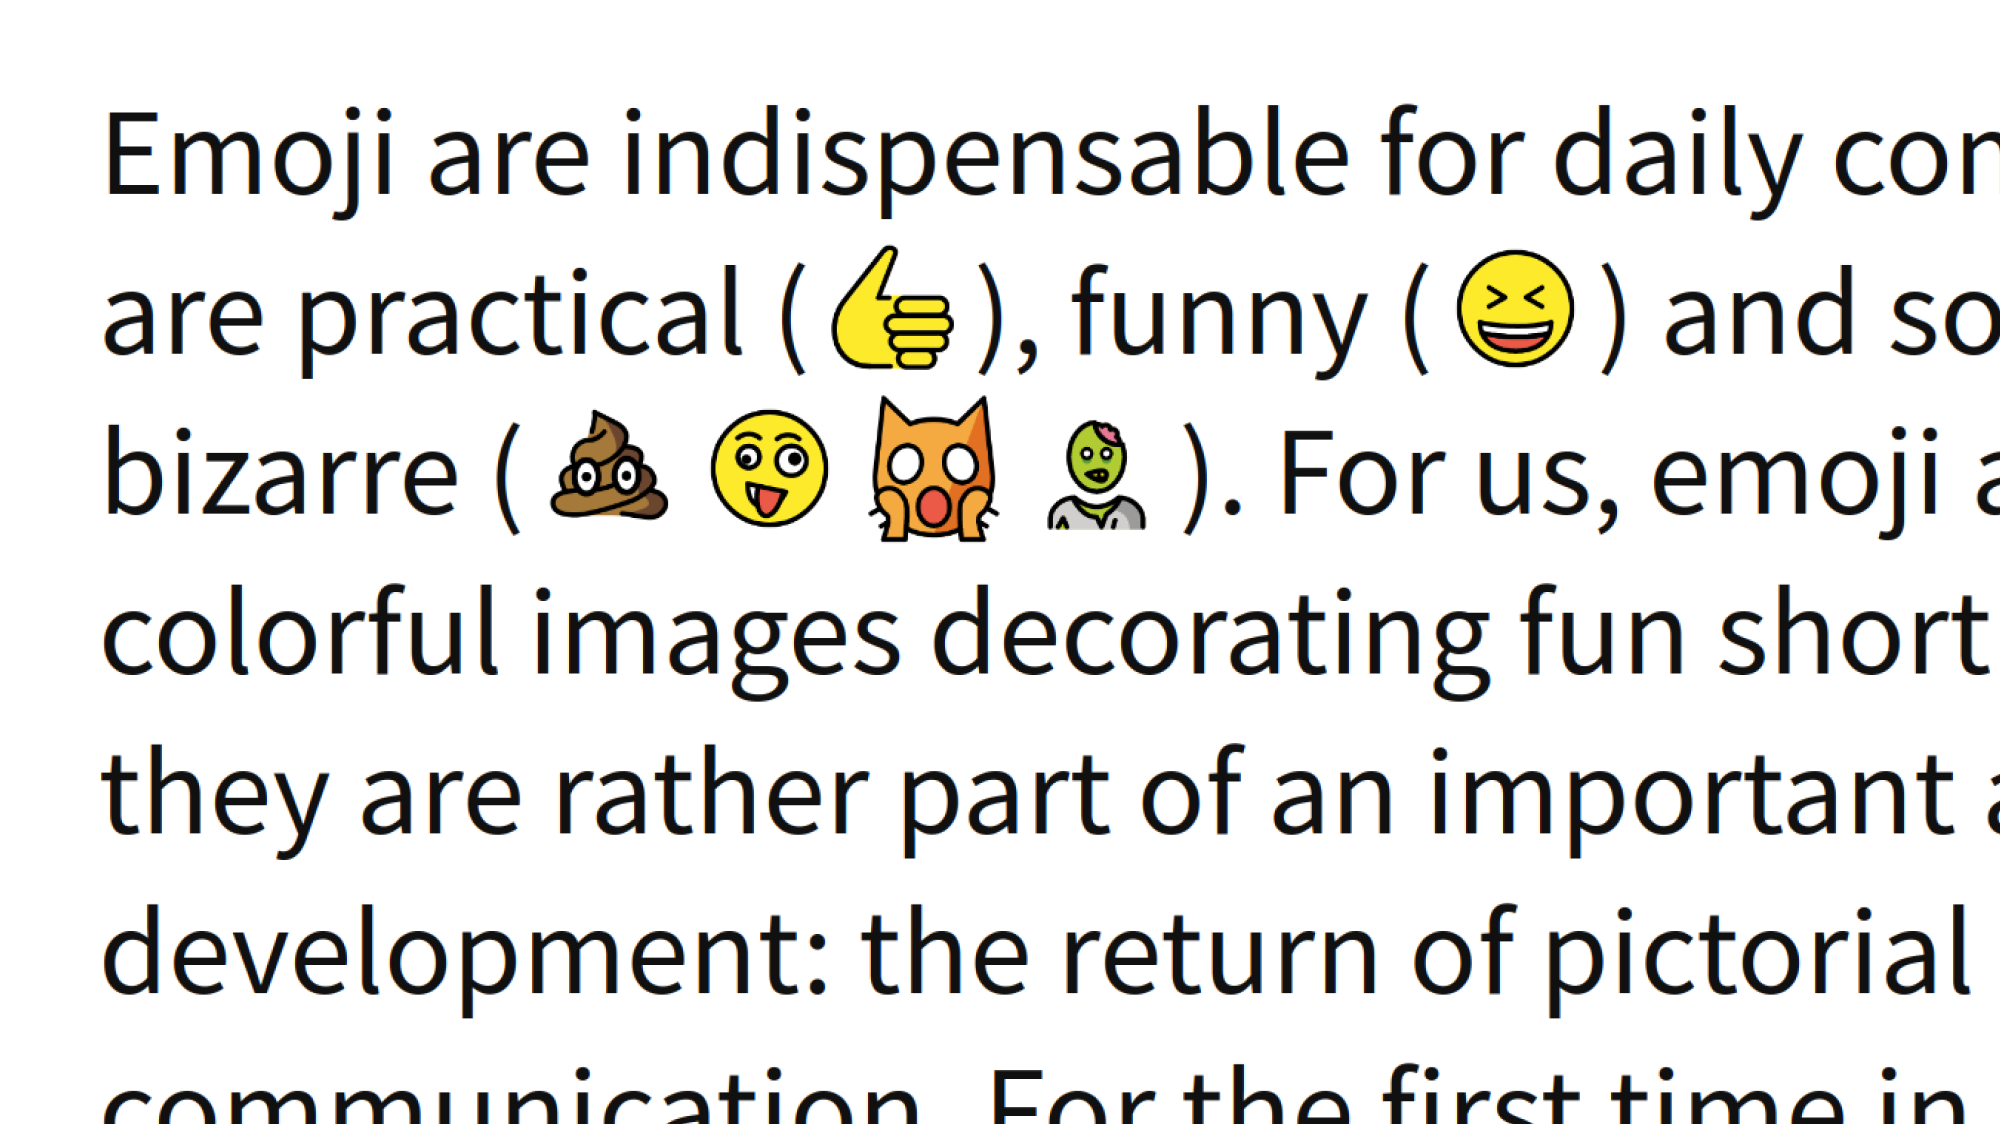 OpenMojis used in text